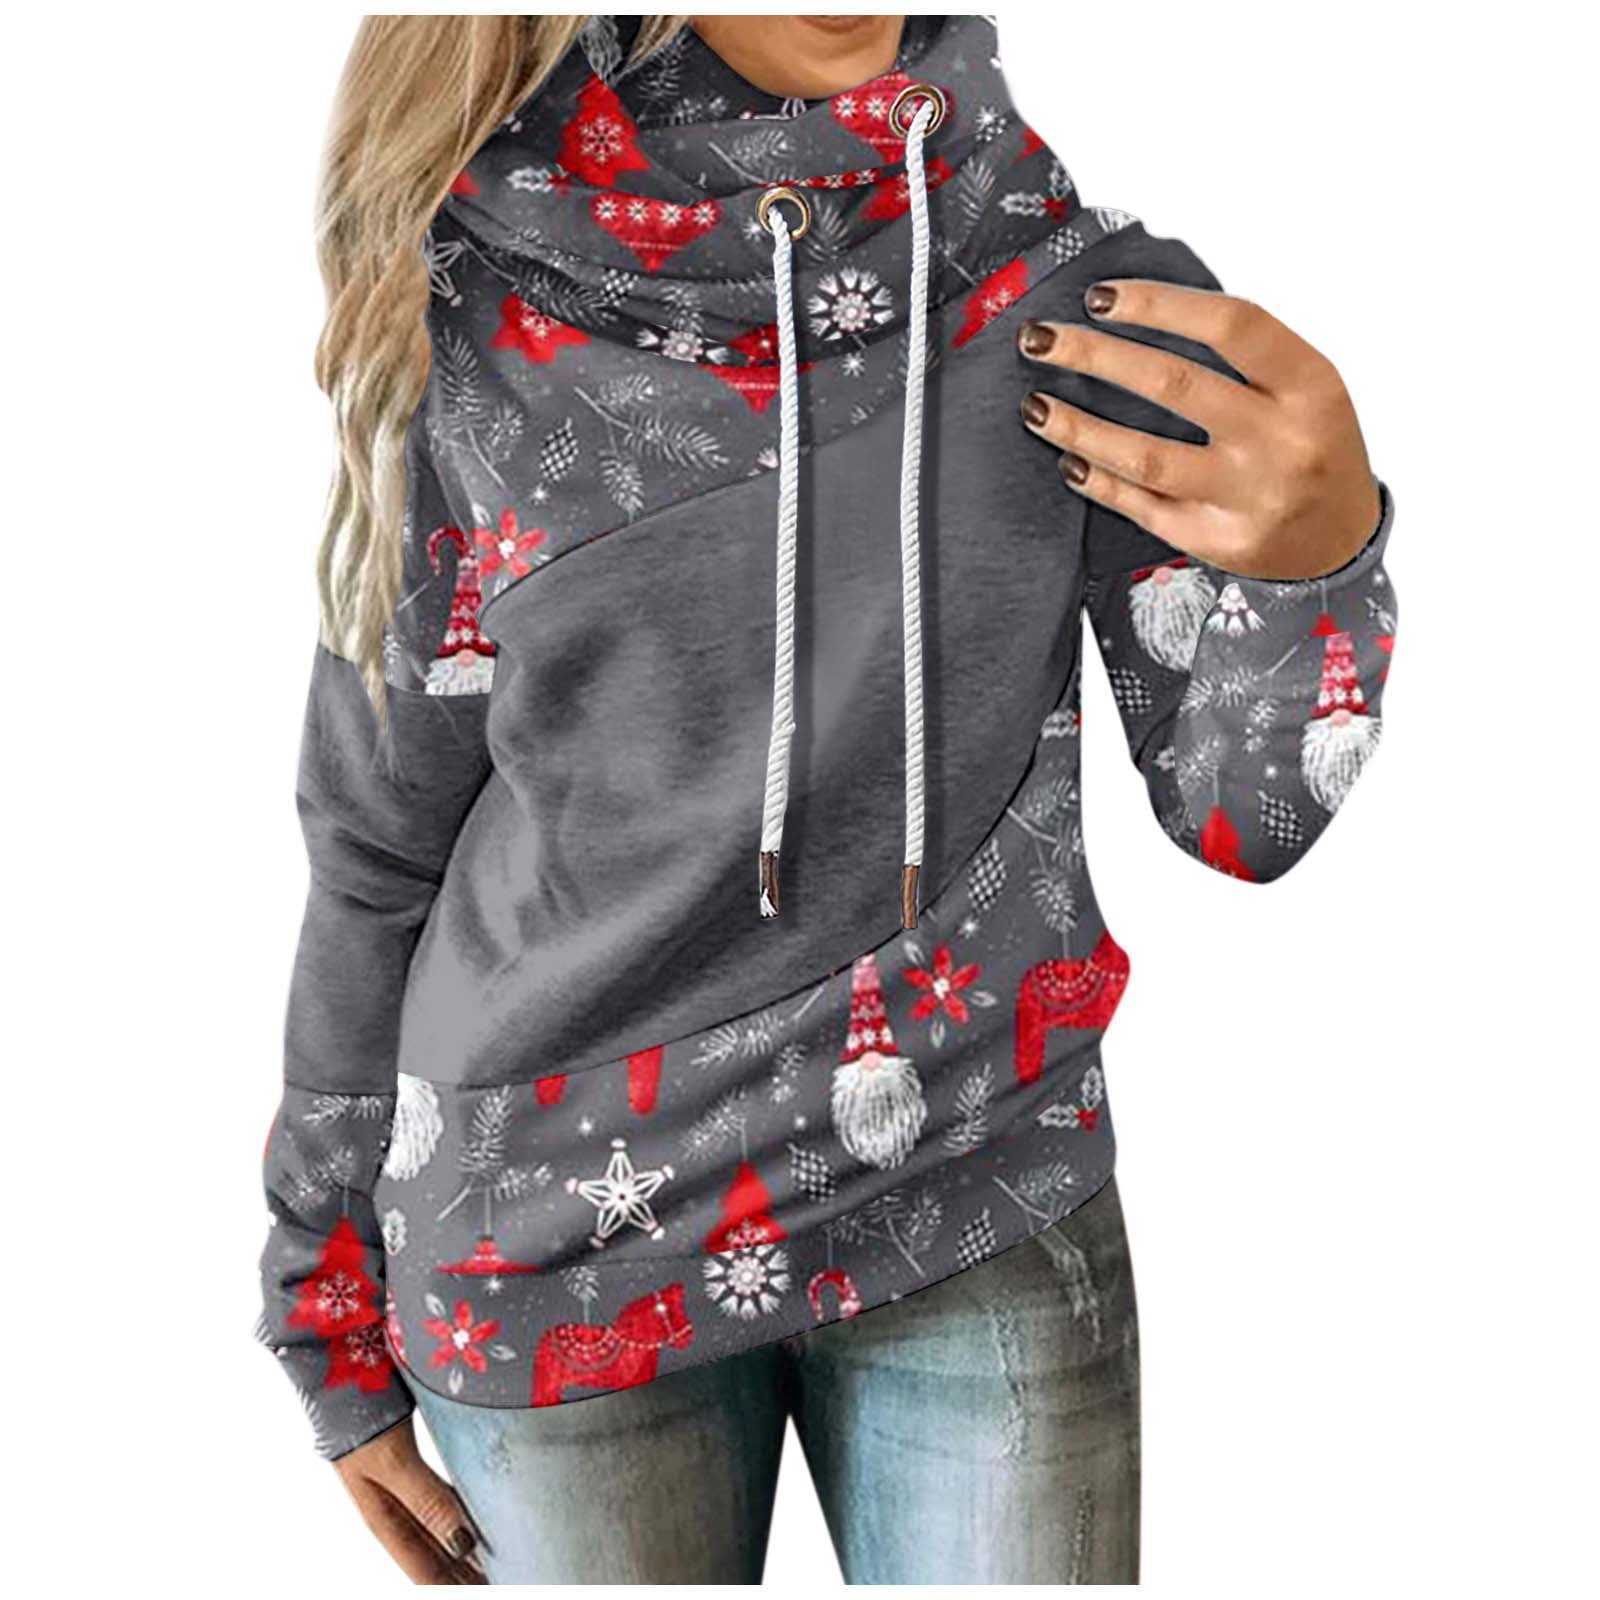 Kanzd Christmas Hoodies for Women Fashion Long Sleeve Buttons Graphic Hooded Sweatshirt Pullover Drawstring Tops Blouse 